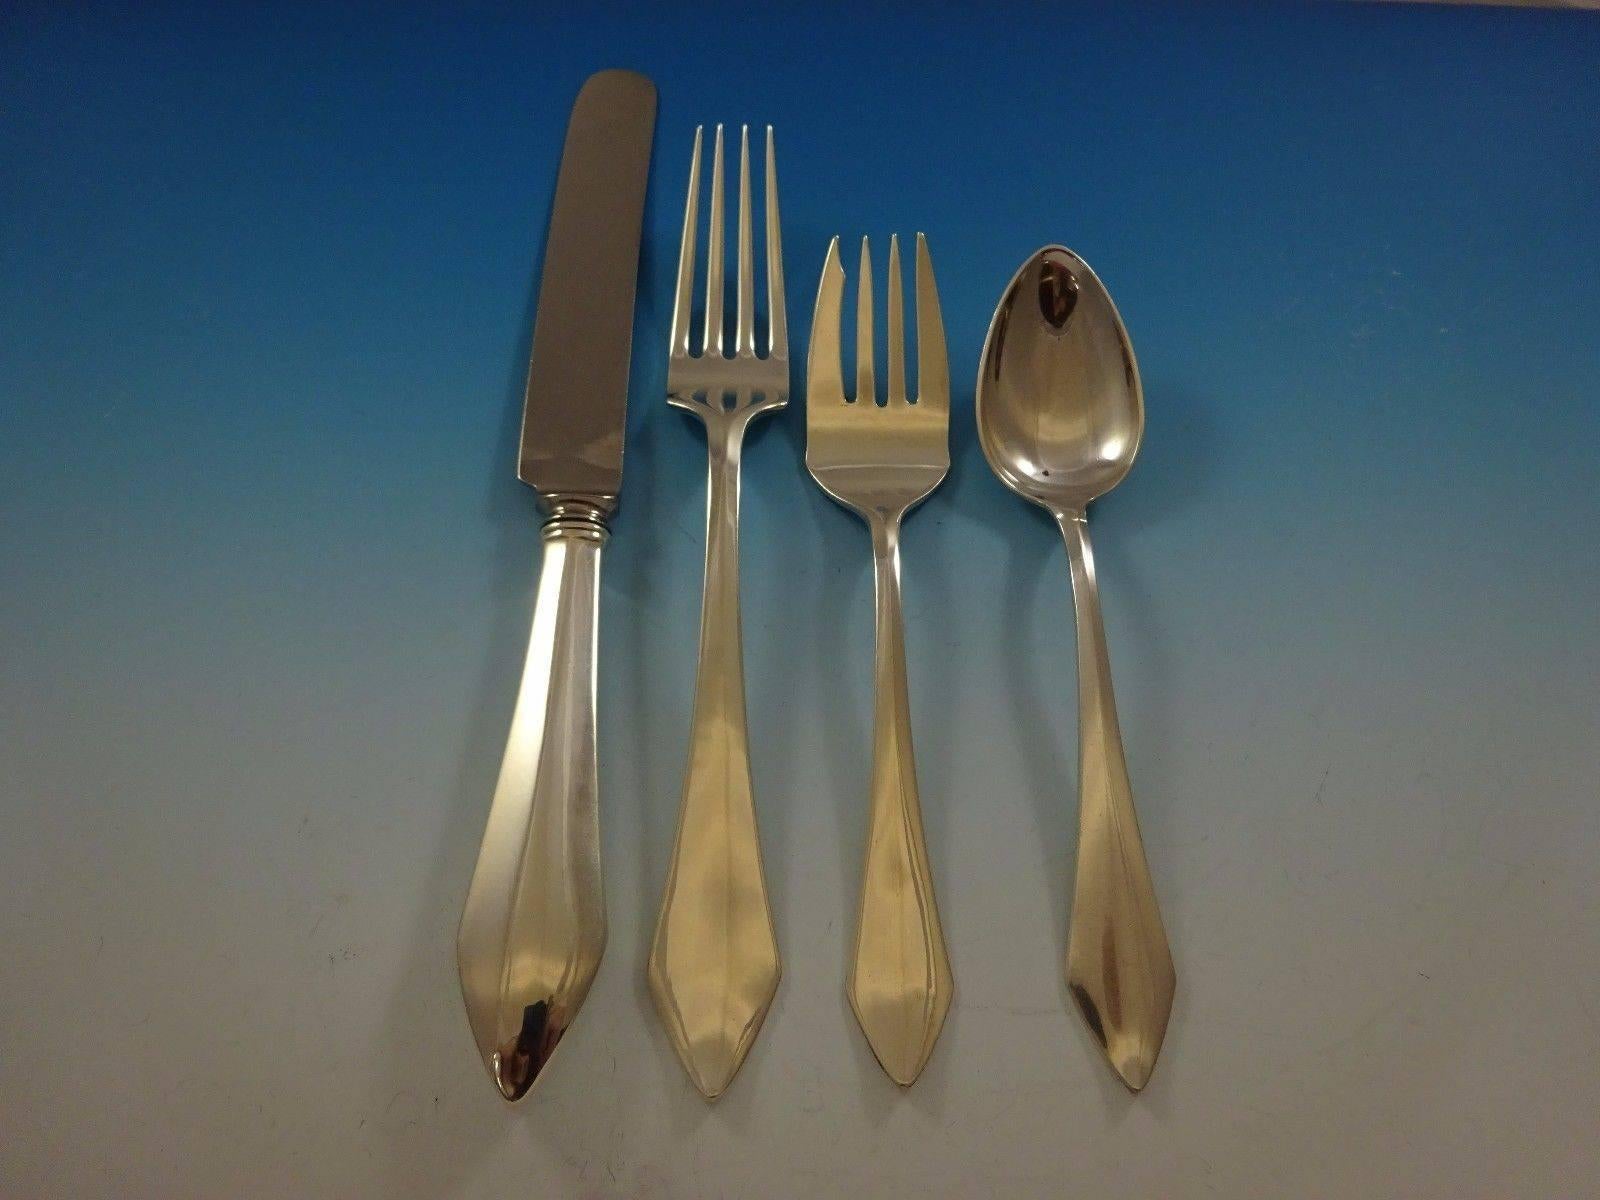 Timeless heirloom quality Chatham by Durgin sterling silver flatware set, 72 pieces. This set includes:

12 knives, 8 3/4